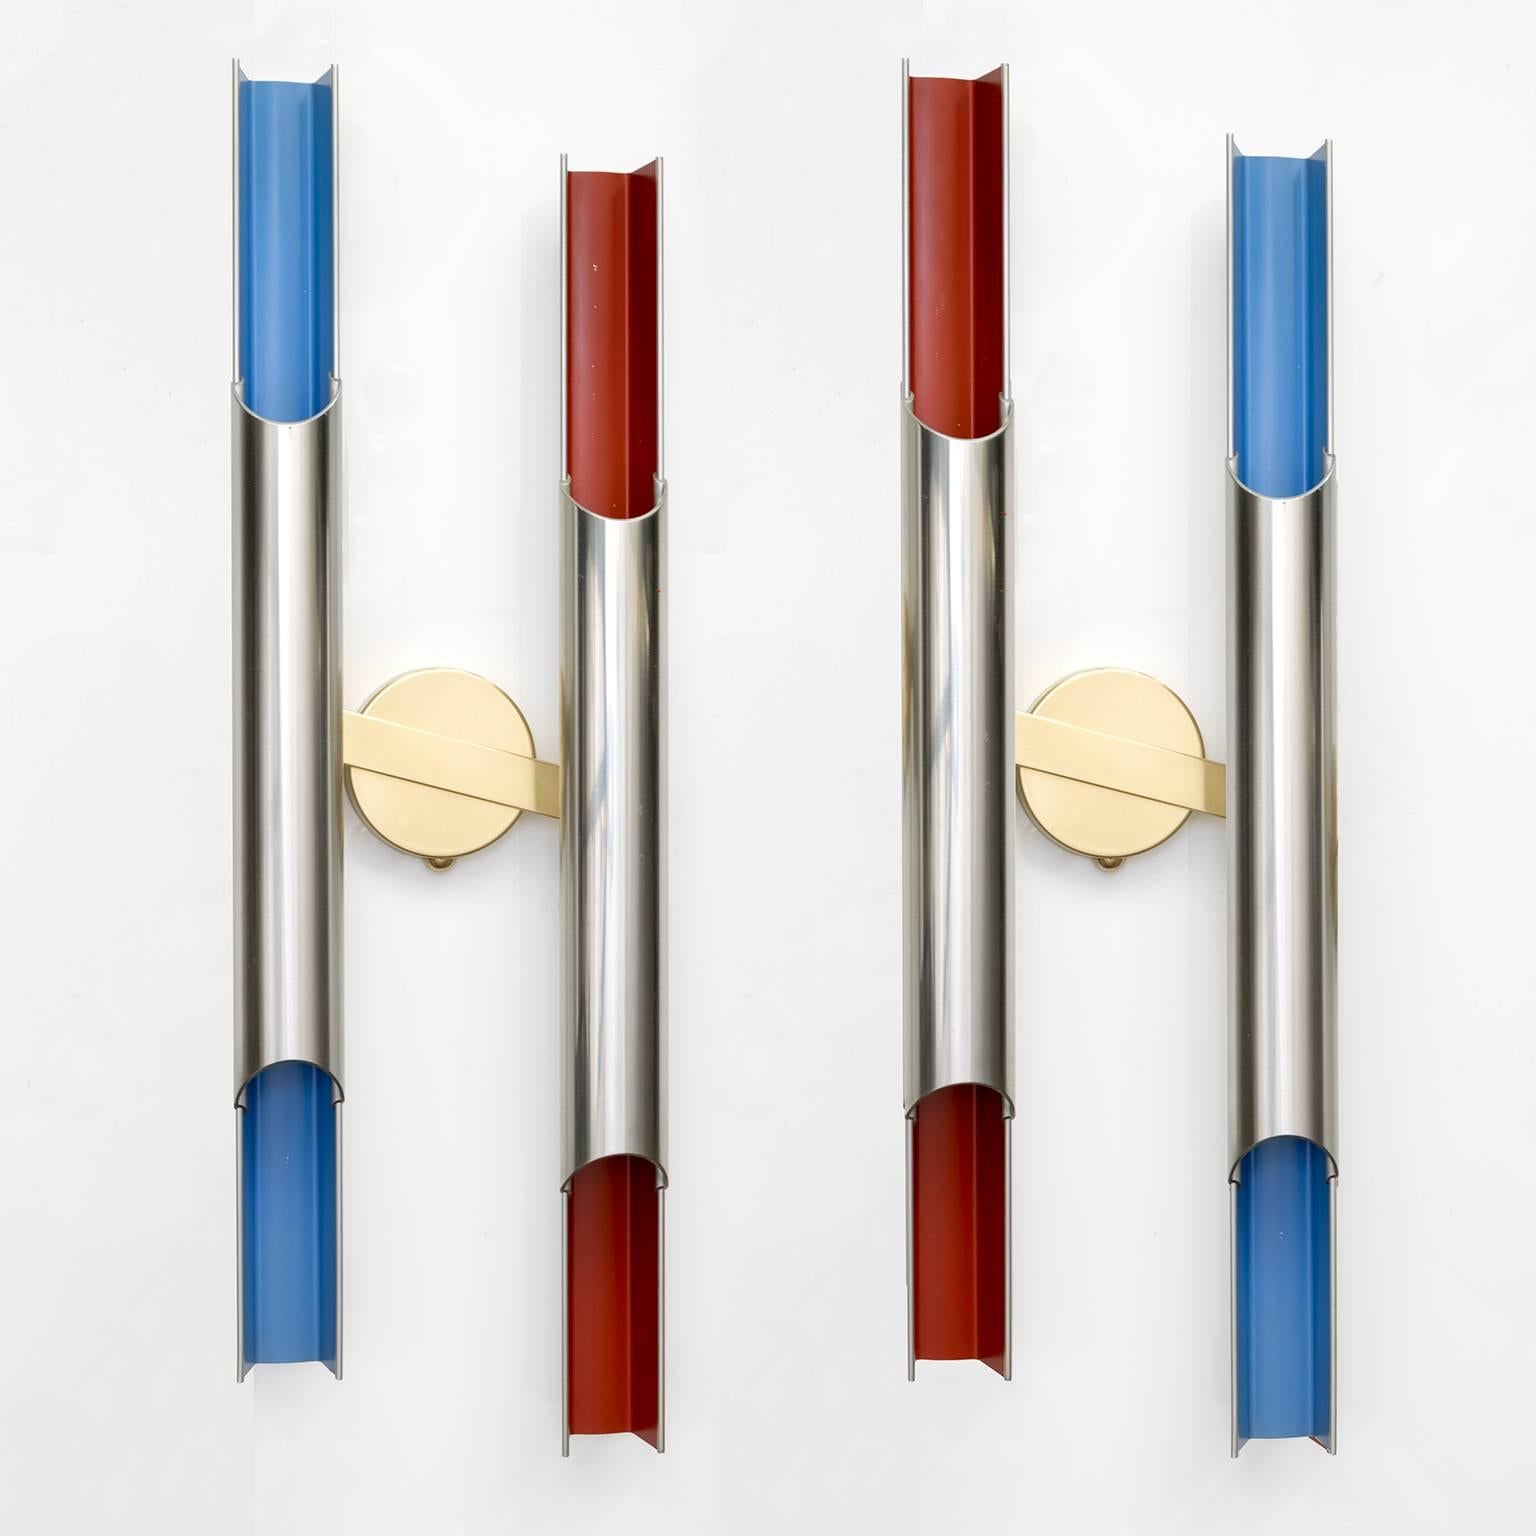 A pair of double arm Scandinavian Modern sconces in polished aluminum with red and blue lacquer. Designed by Bent Karlby for Lyfa, Denmark, 1968. The tubular forms hold two candelabra base bulbs per arm. The angled brass backplates are original.